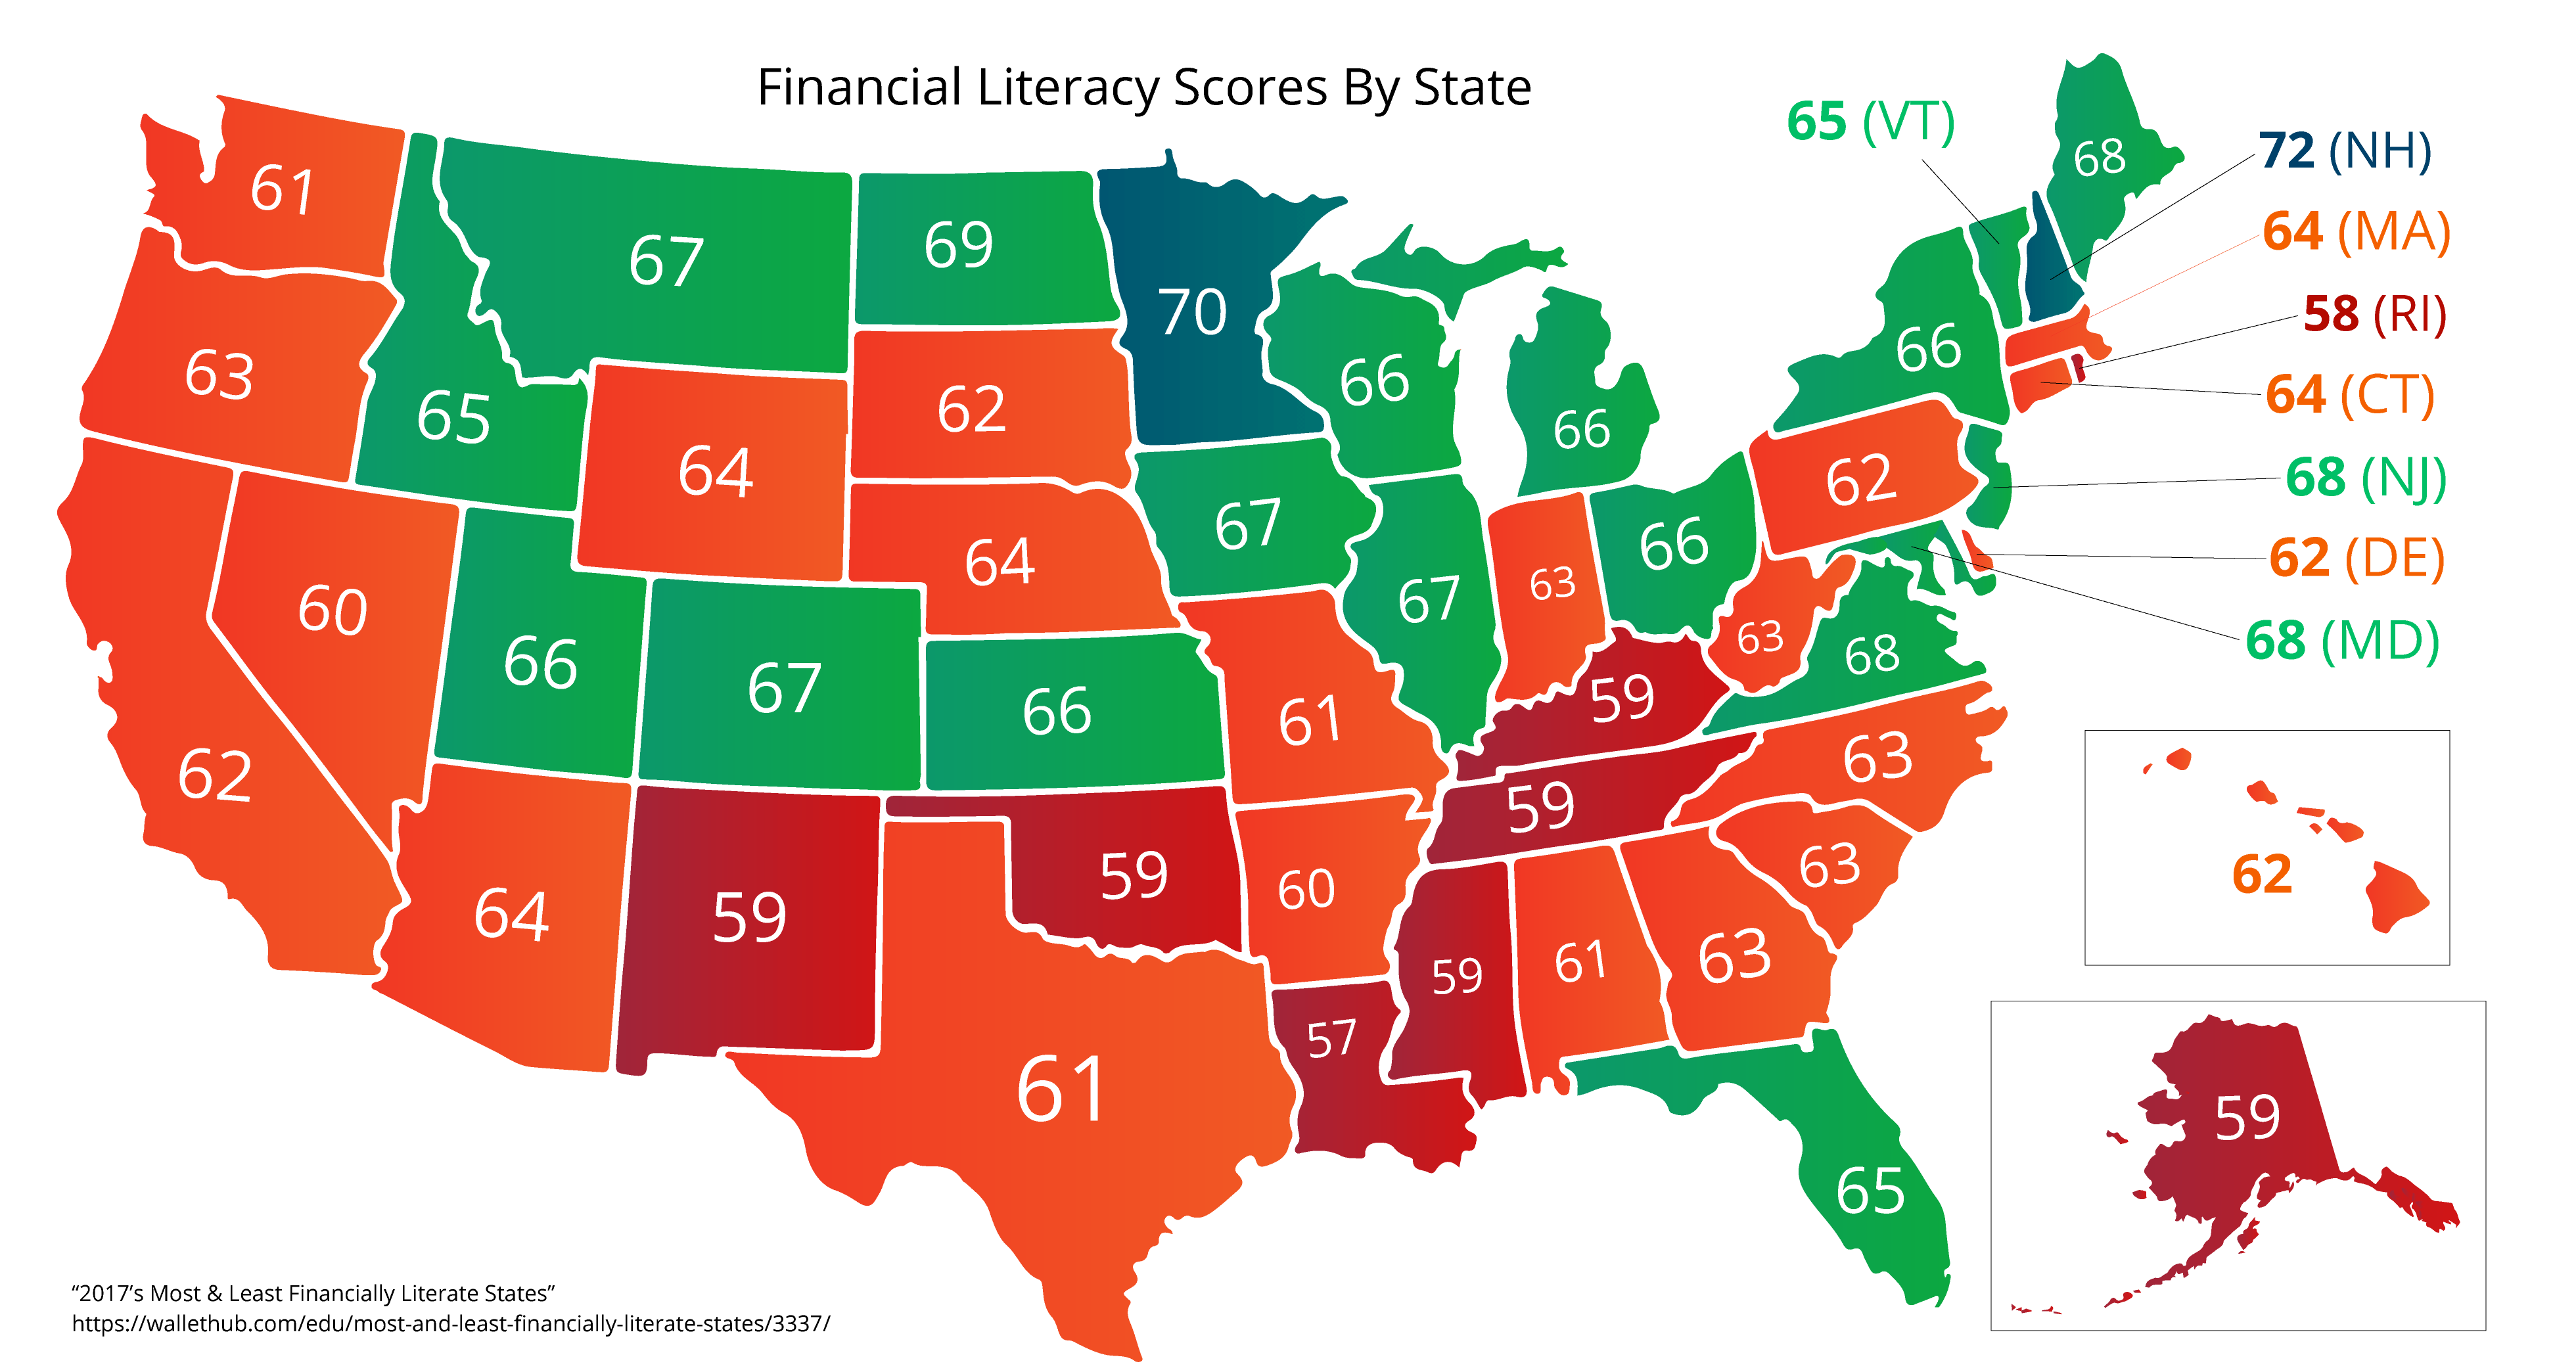 Financial Literacy Scores by State